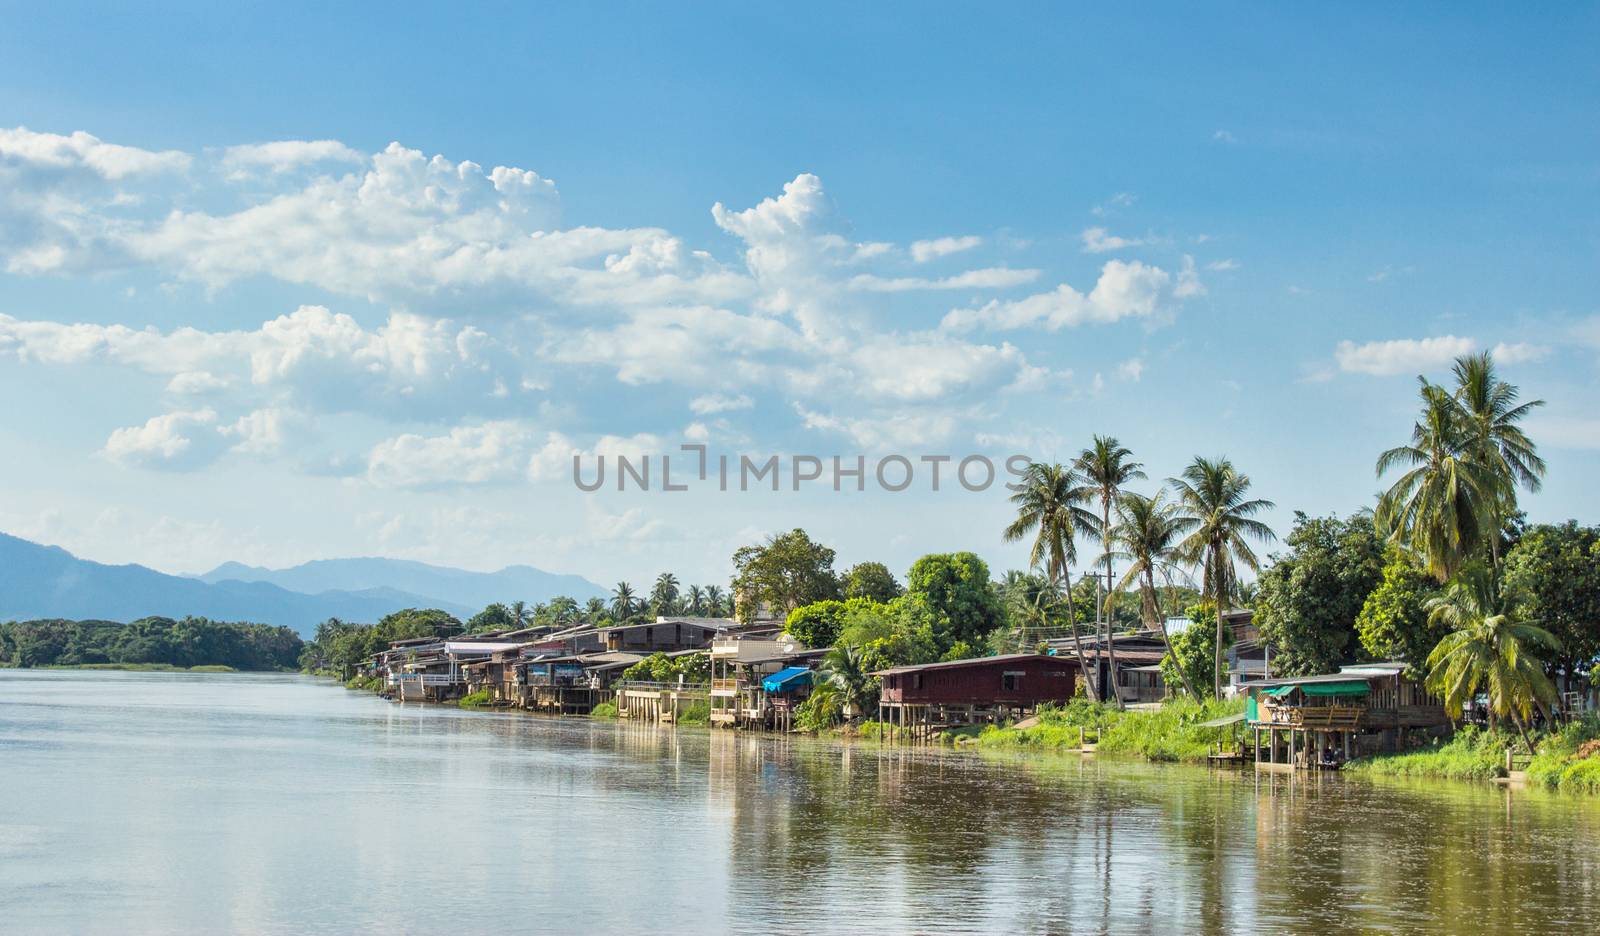 Communities living along the Ping River  by yod67